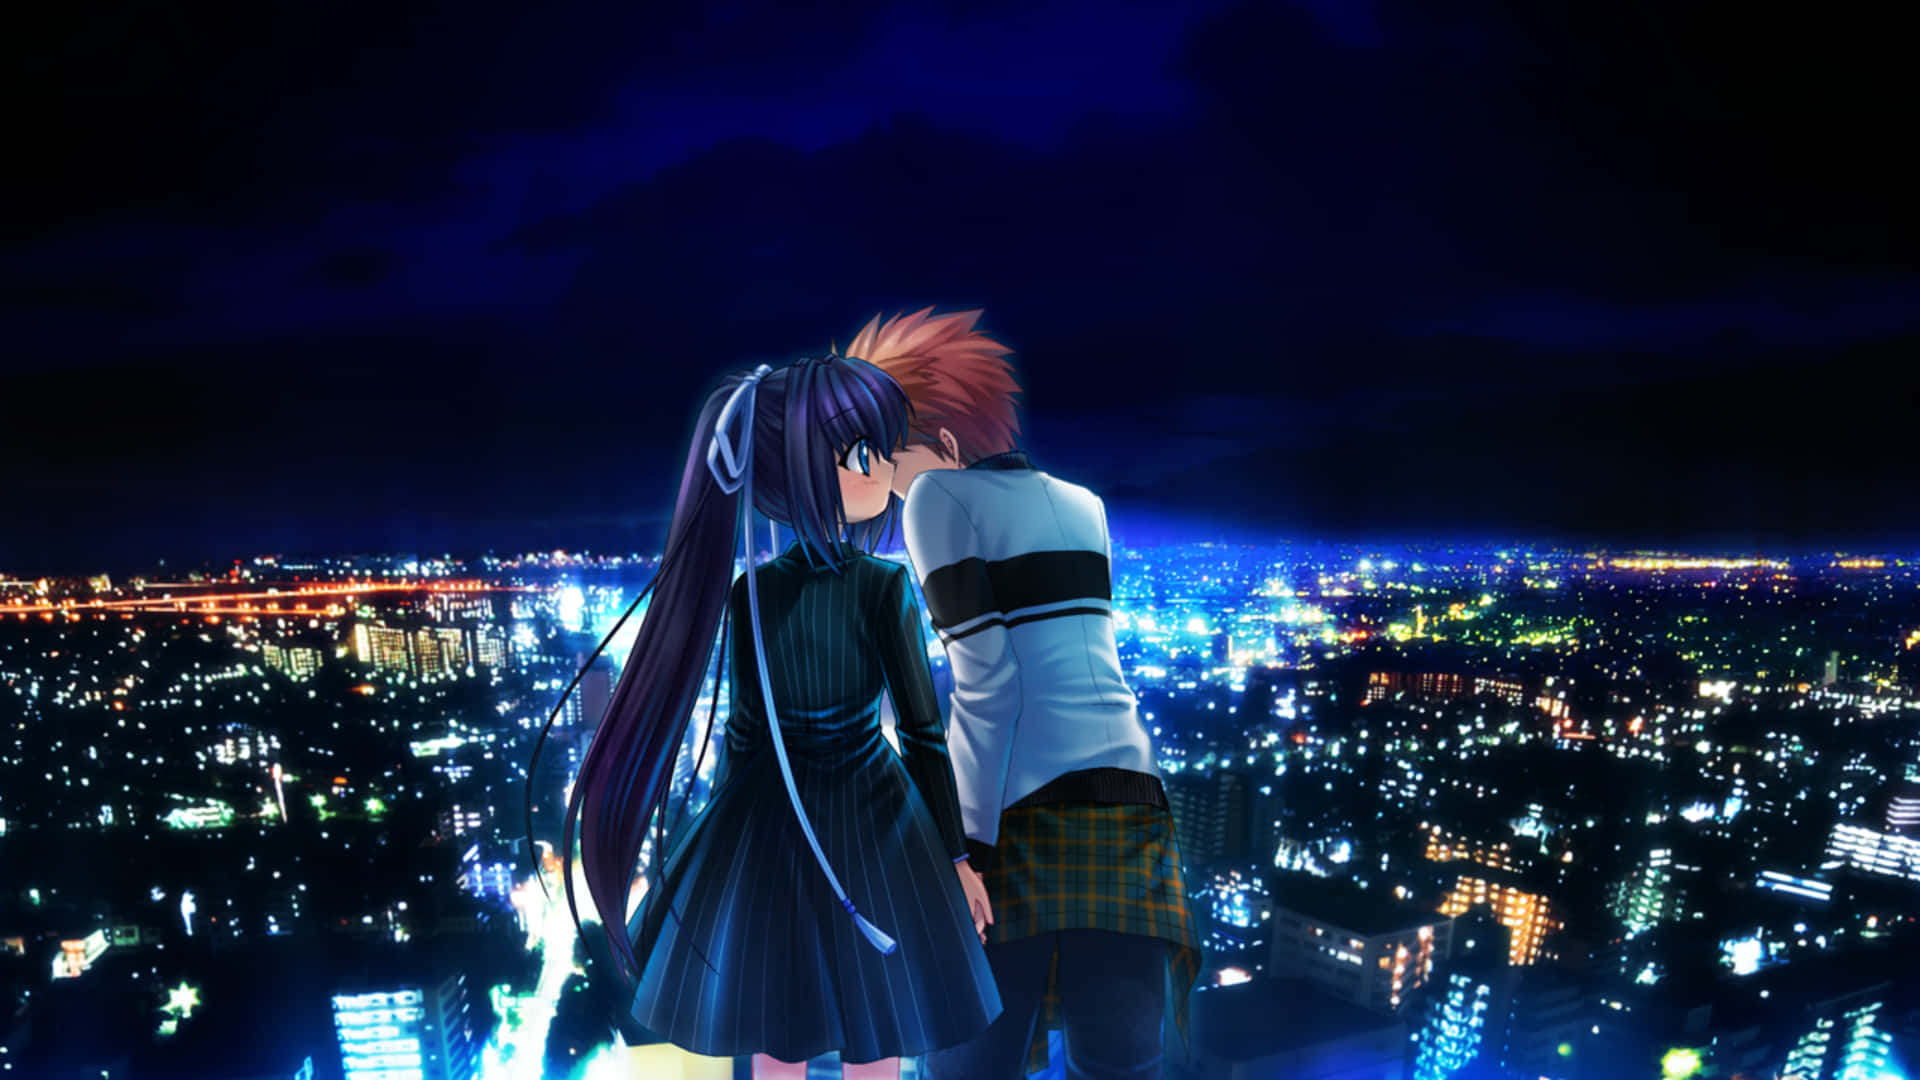 Animerewrite Love Kiss Can Be Translated To Spanish As 